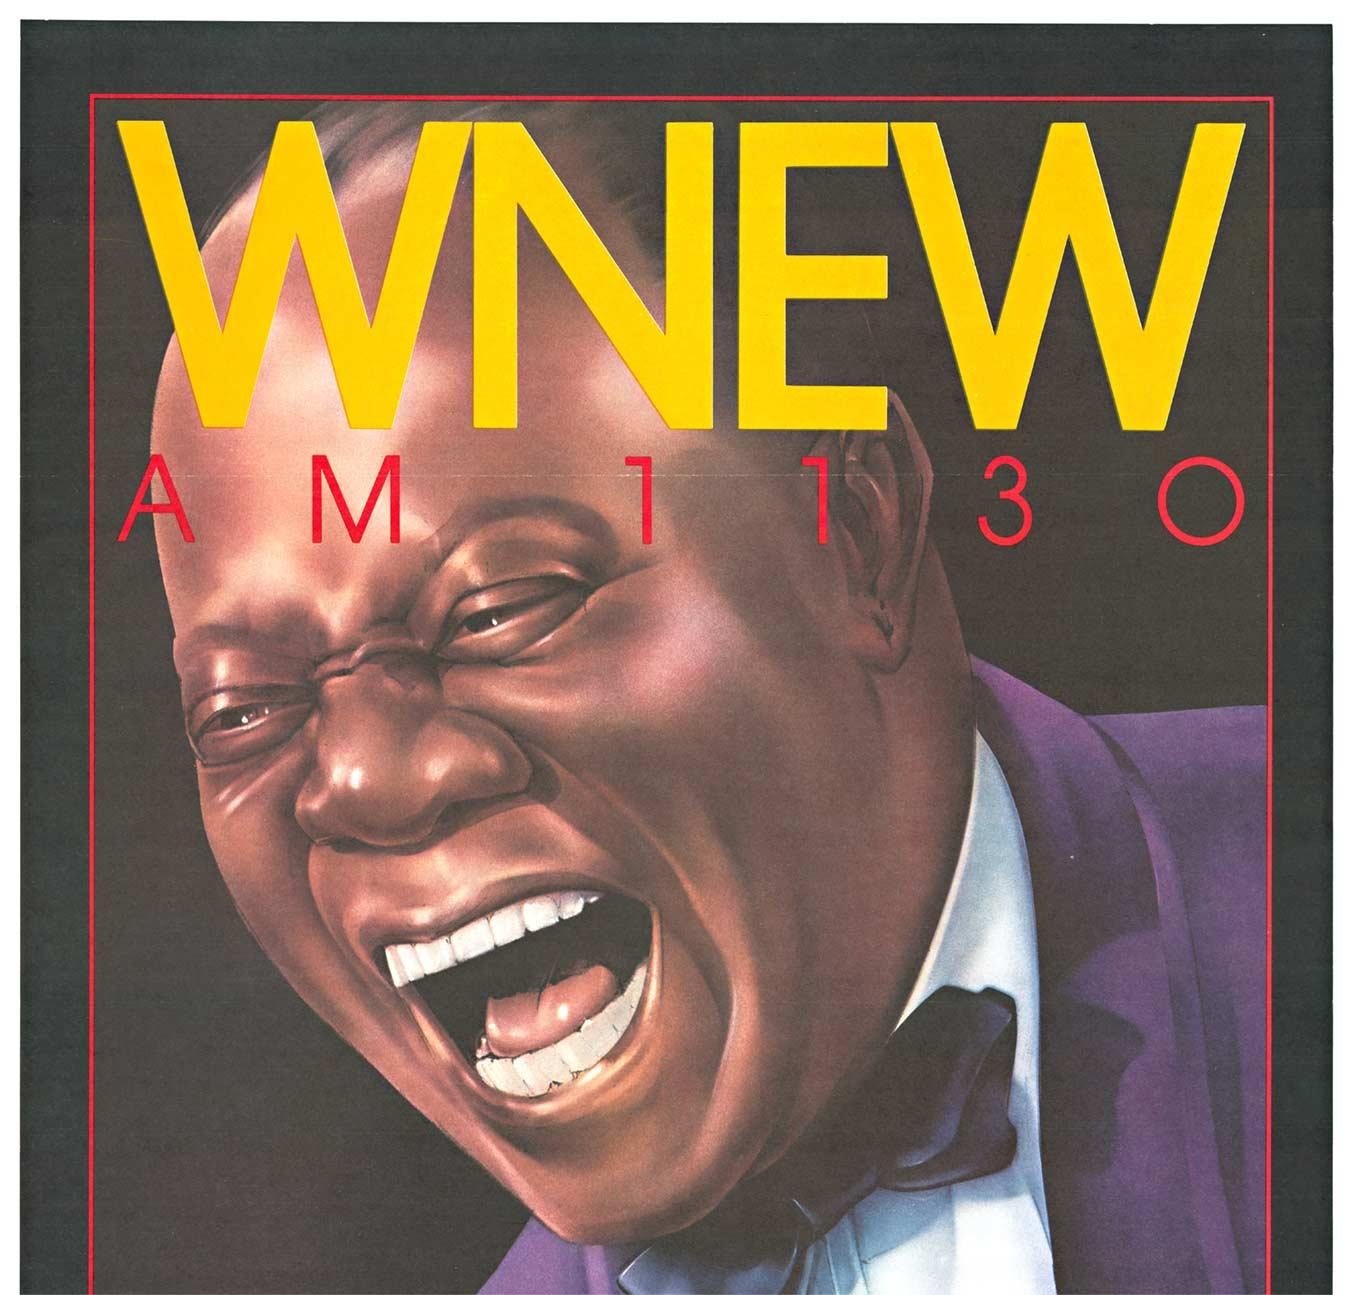 Original LOUIS ARMSTRONG WNEW AM 1130 vintage poster - Print by Bob Lee Hickson